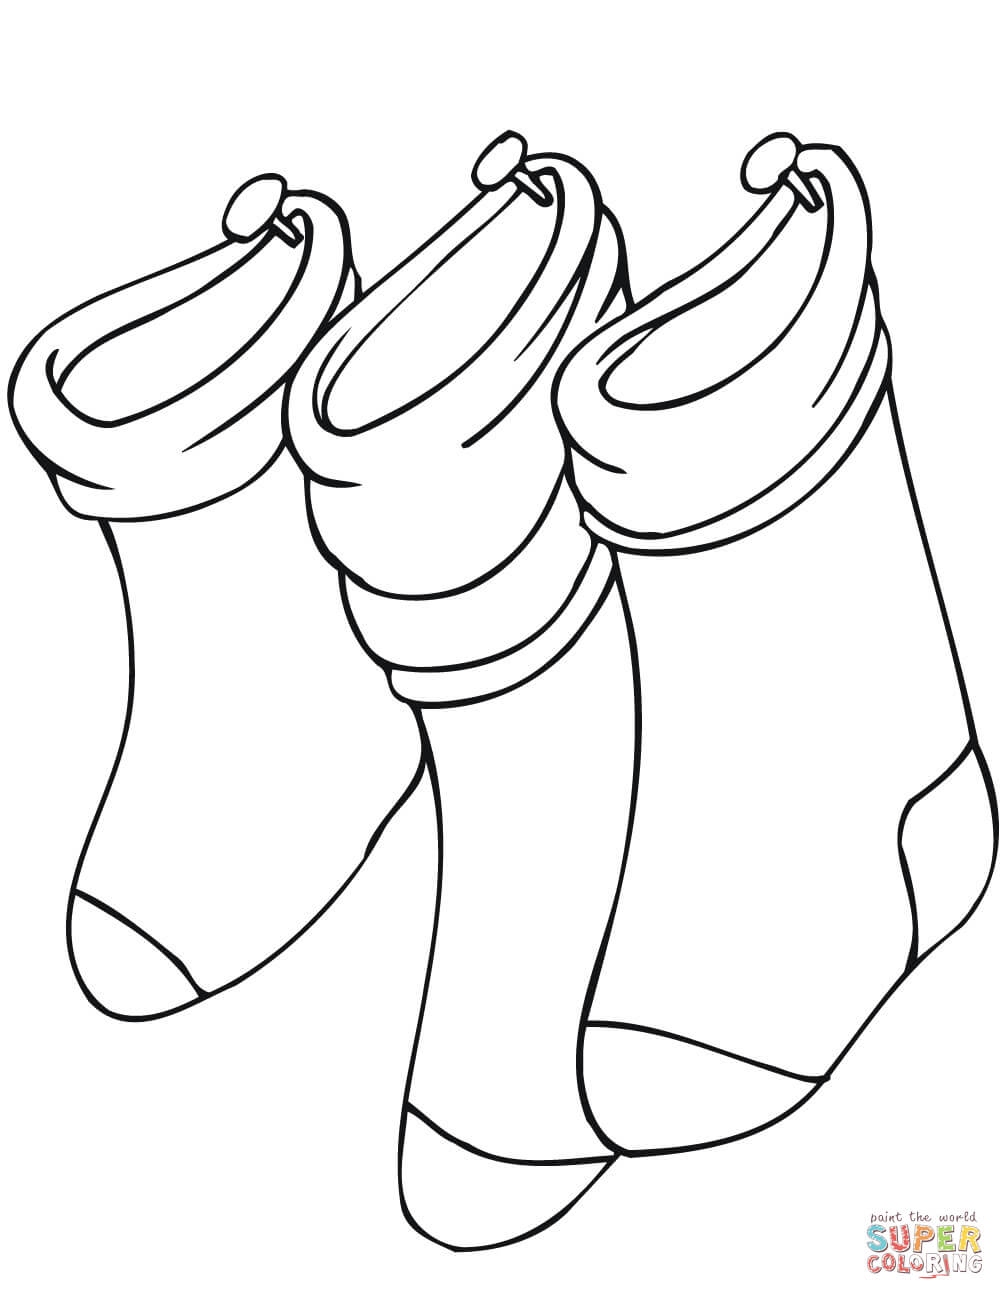 Sock Coloring Page at GetColorings.com | Free printable colorings pages ...